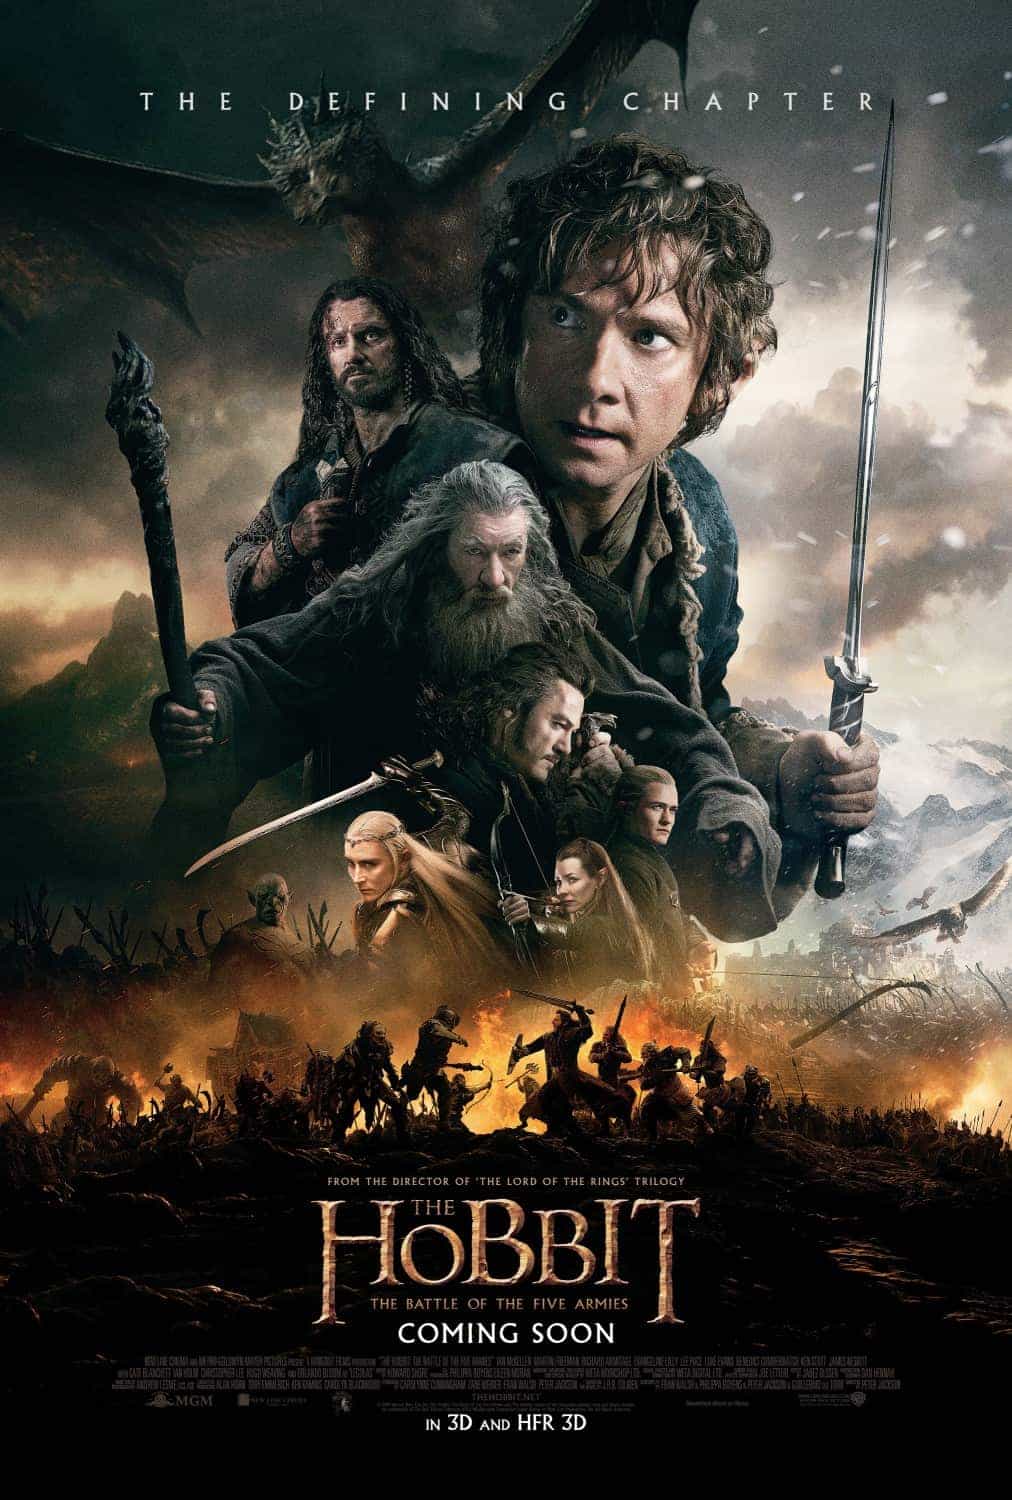 UK Box Office Weekend Report 12th - 14th December 2014:  The final Hobbit movie, Battle Of The Five Armies fights to the top on its debut